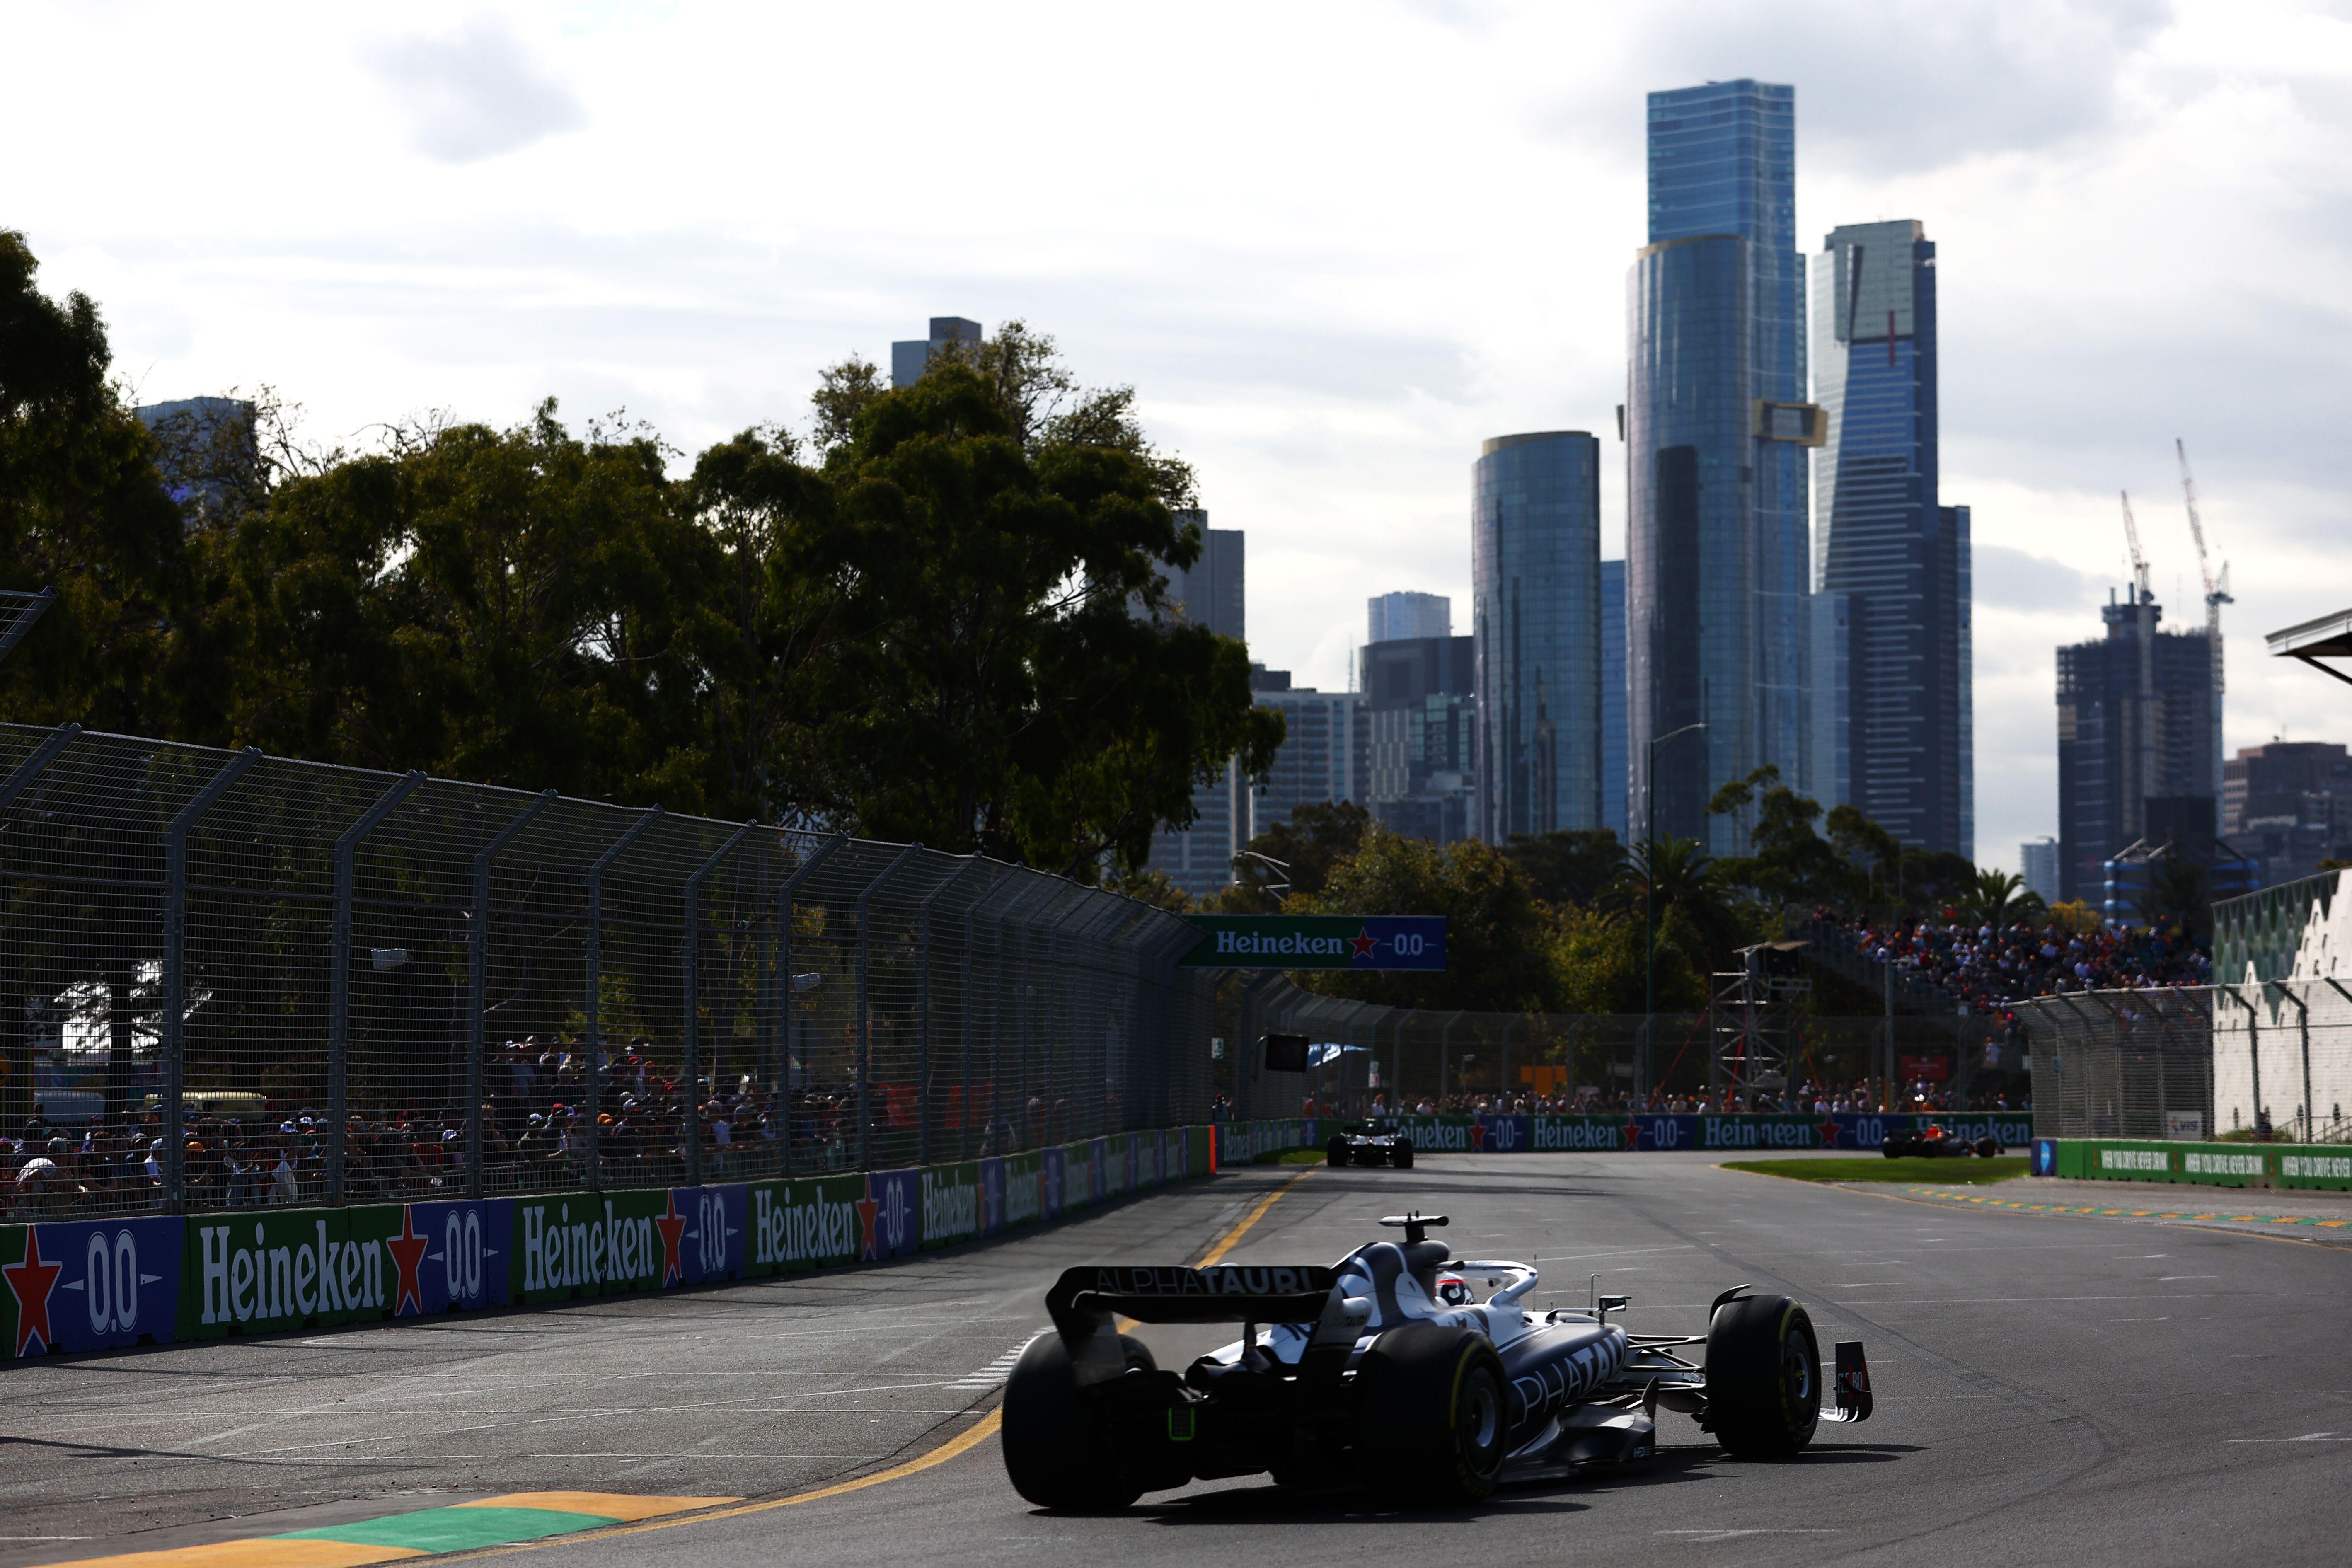 F1 Cars with City view